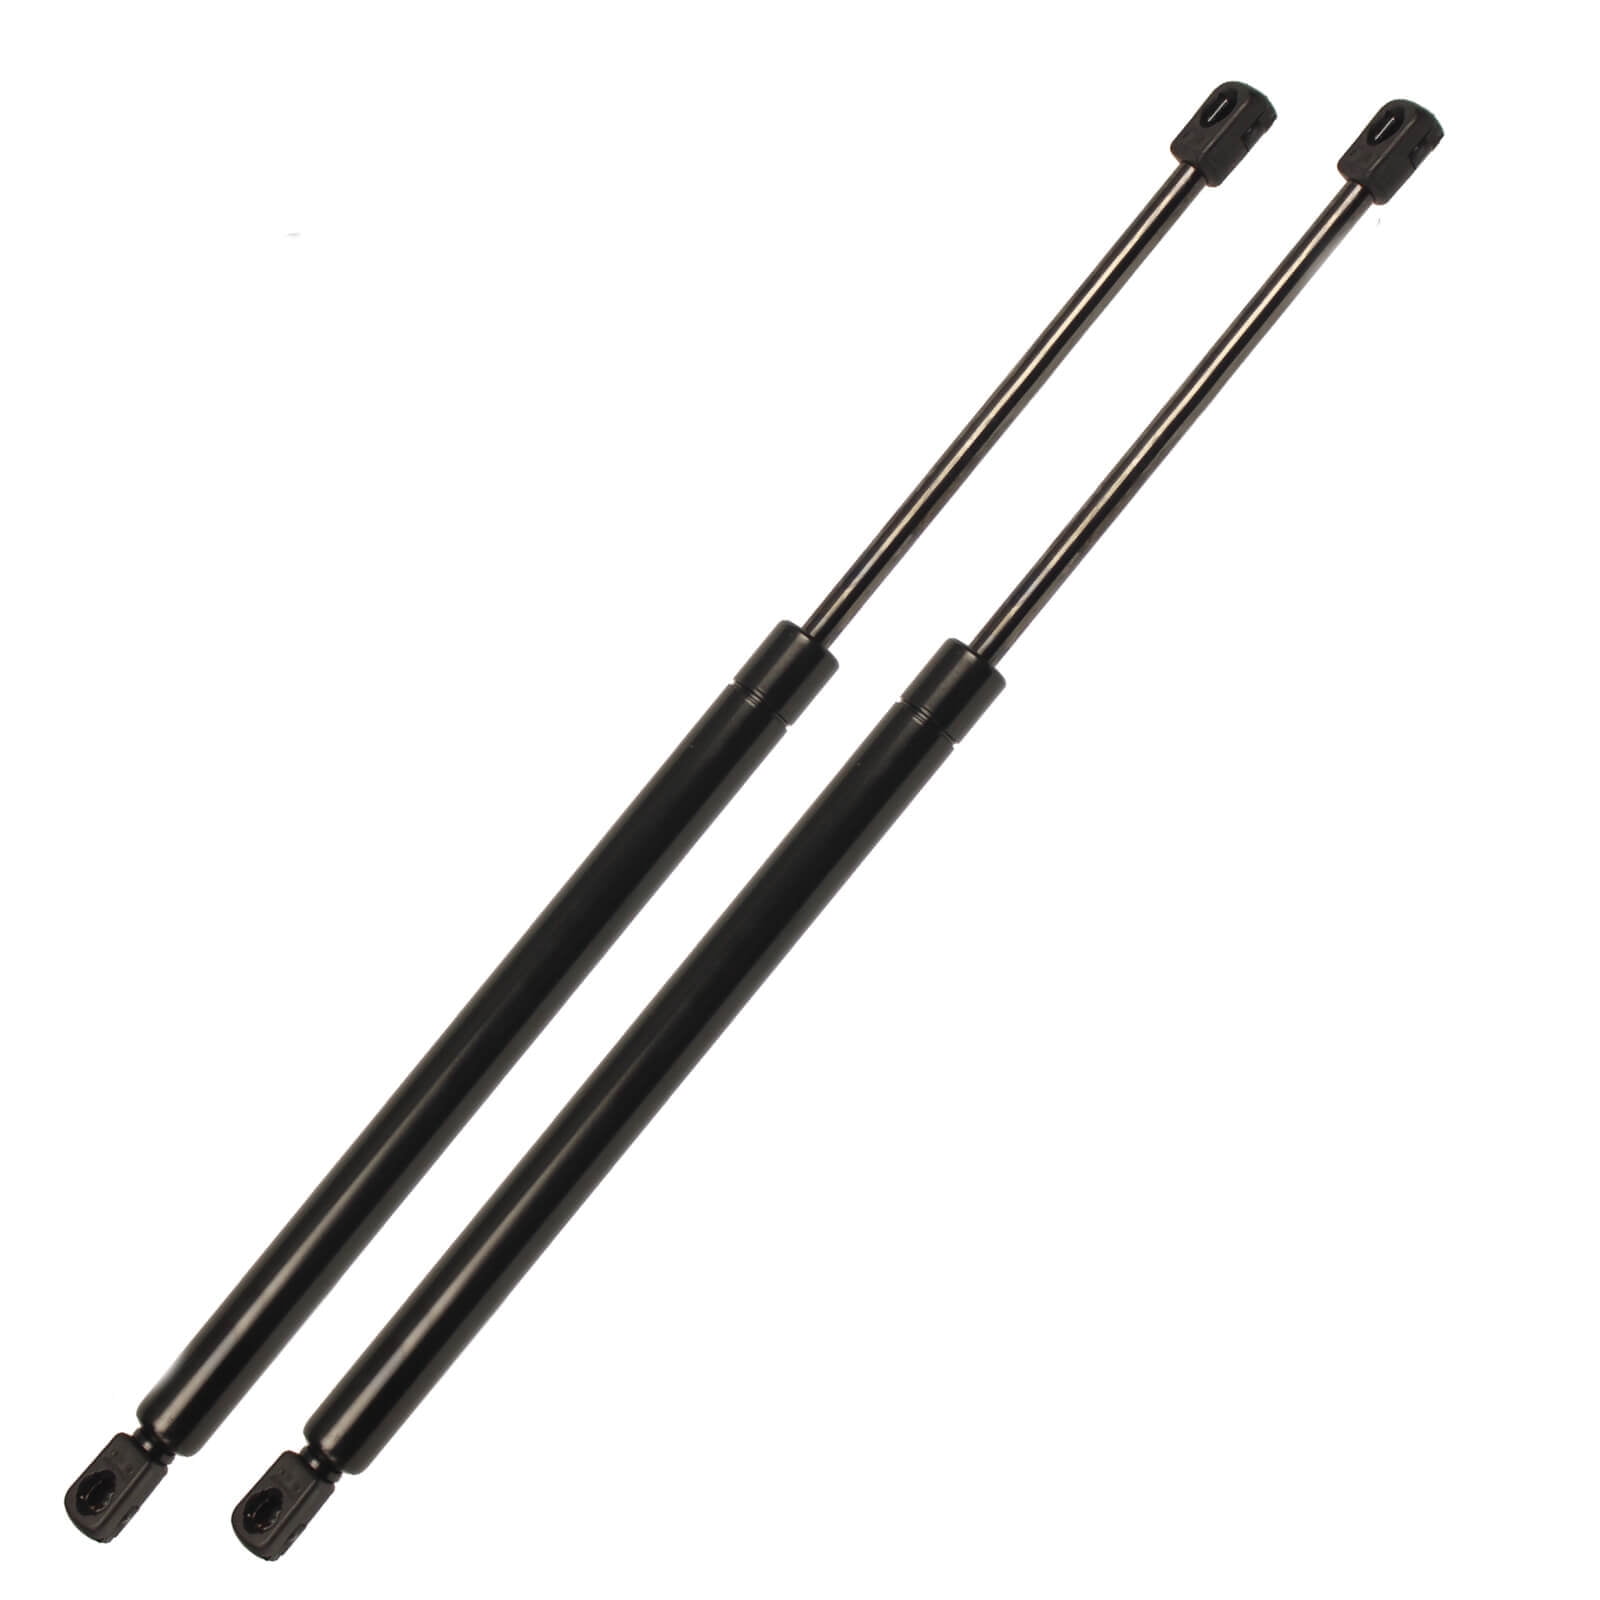 A-Premium Universal Lift Supports Shock Struts Spring Prop with Spike Extended Length 35.43 Compressed Length 19.69 Force 60lbs 2-PC Set